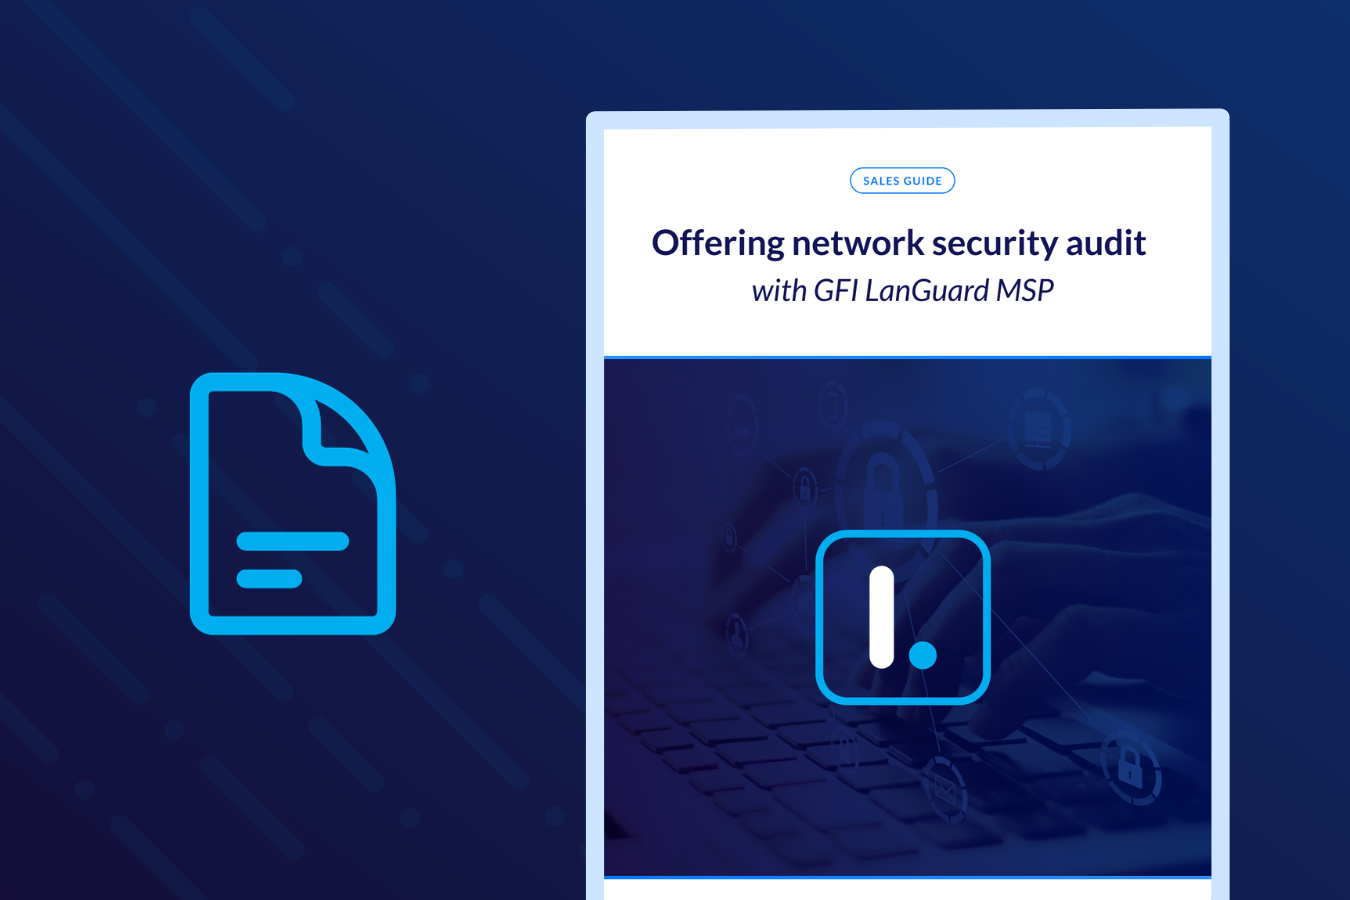 Offering network security audit with GFI LanGuard MSP